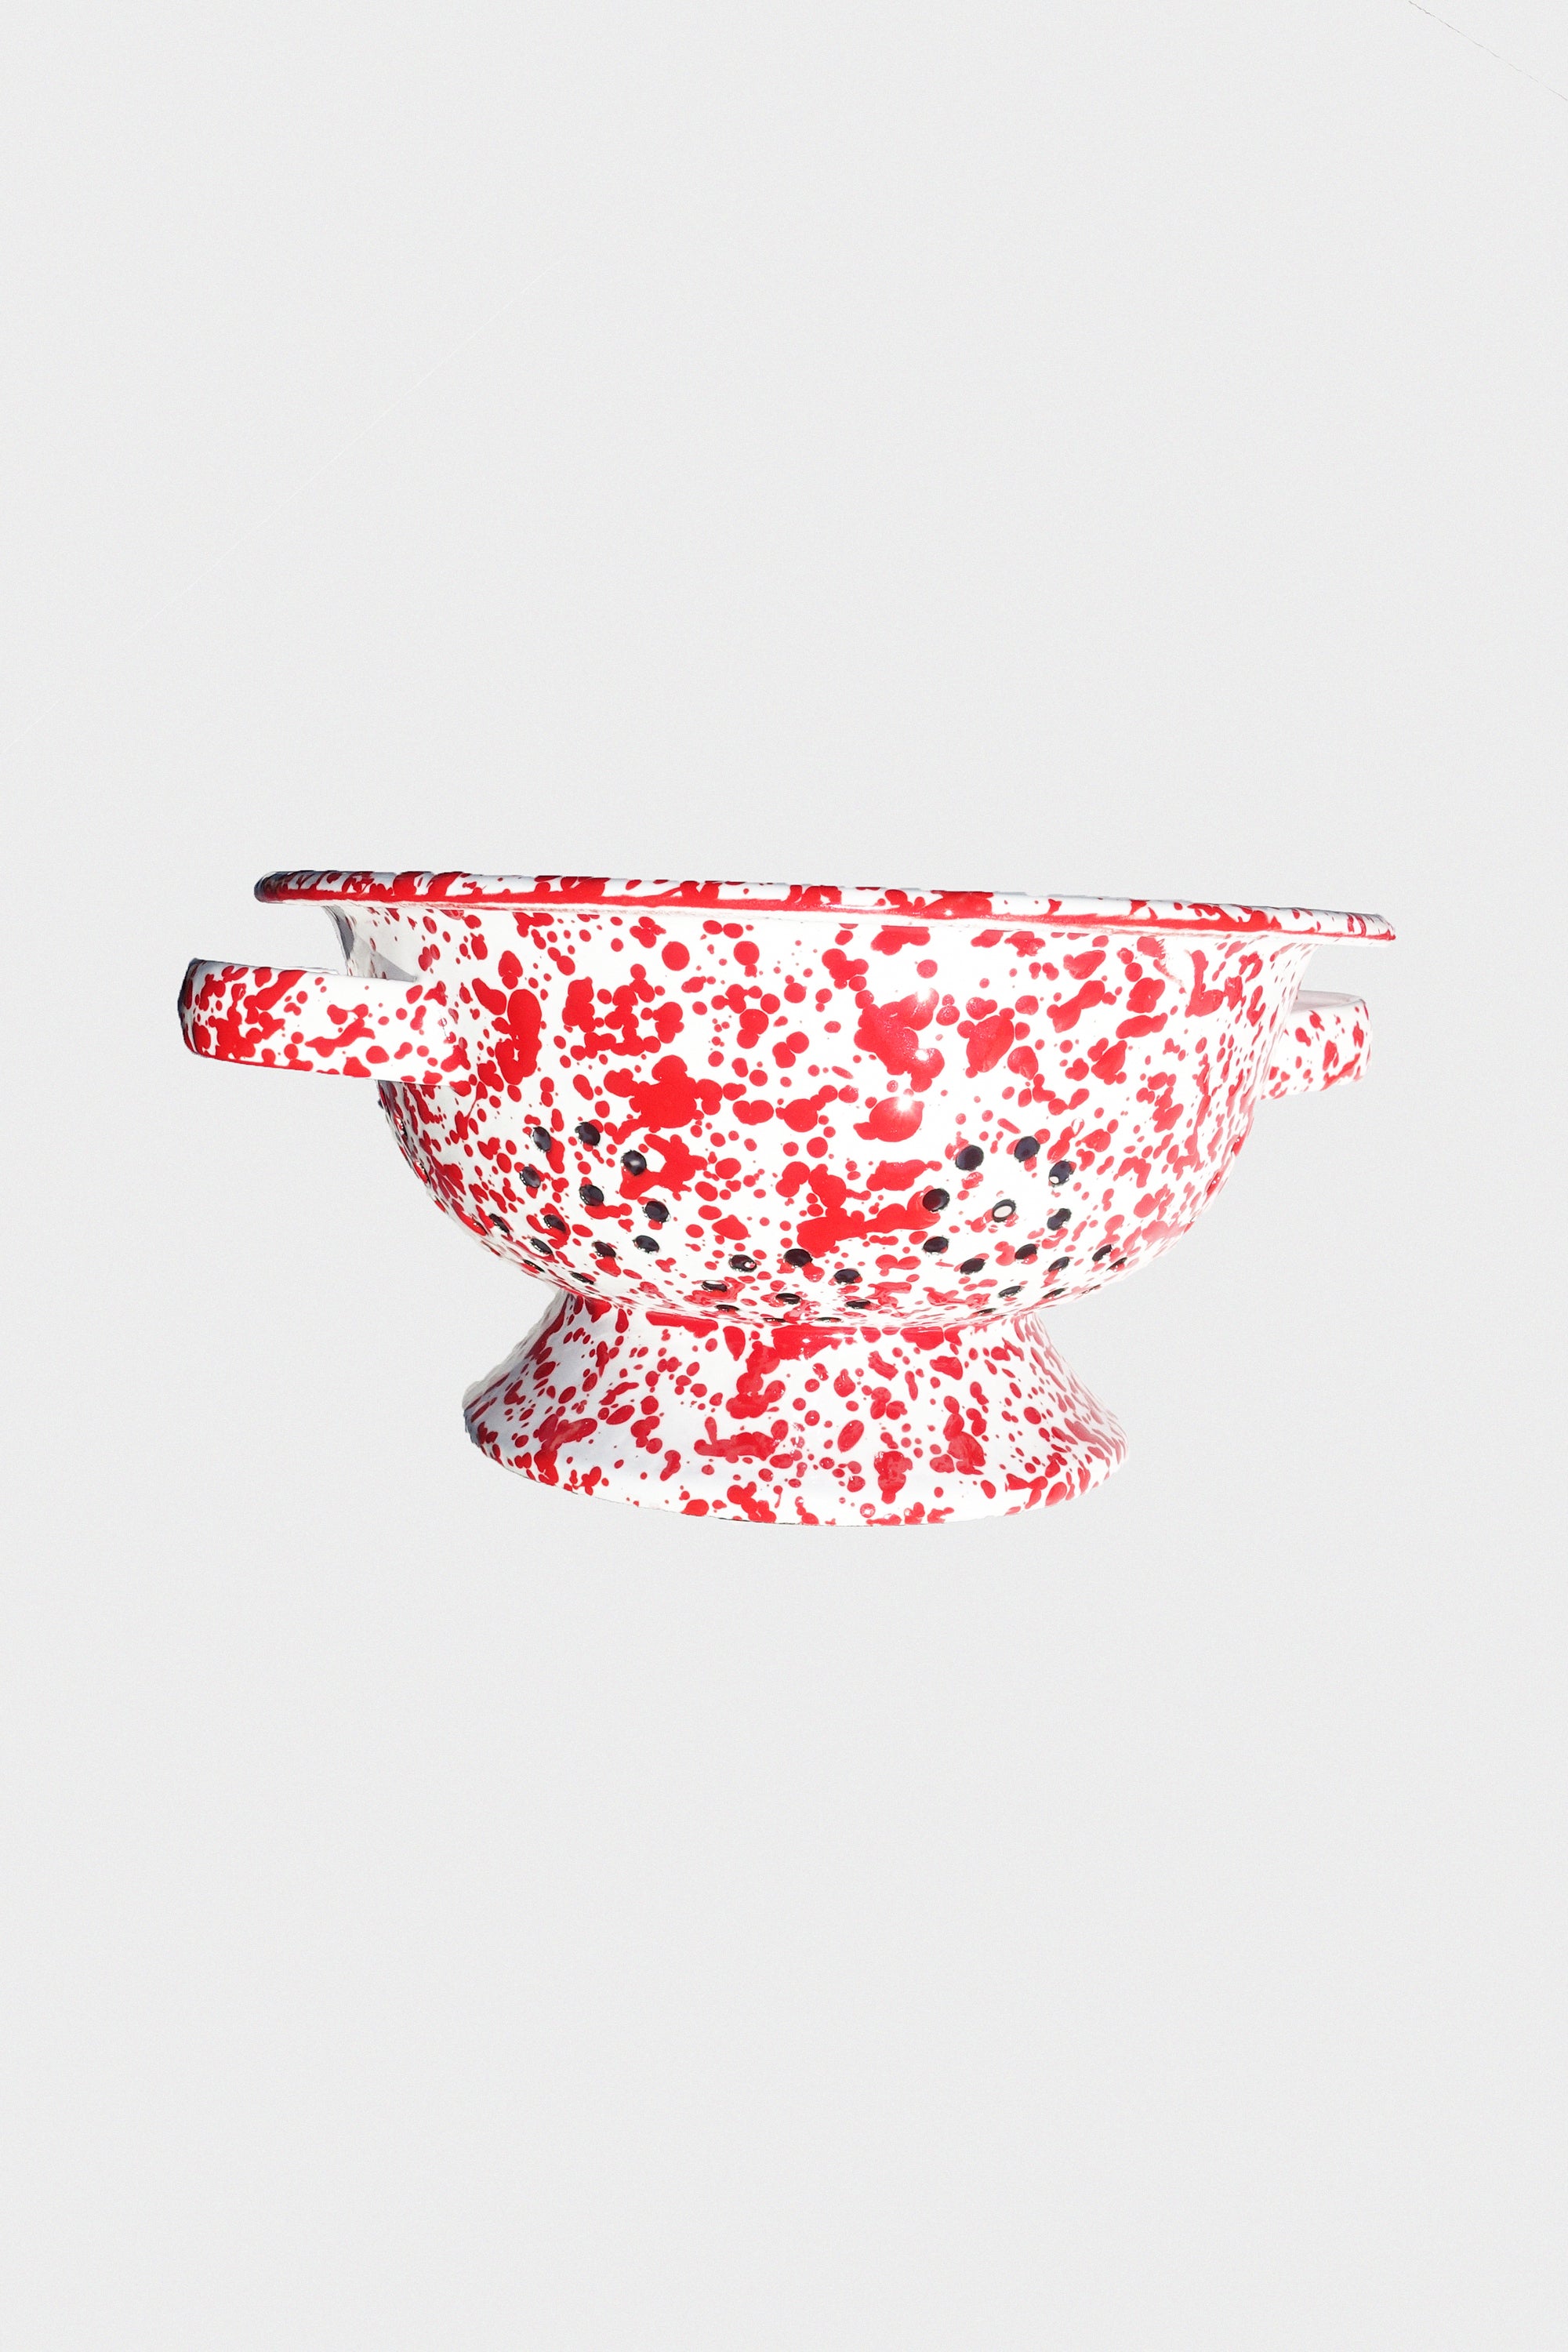 Small Berry Colander in Red Splatter